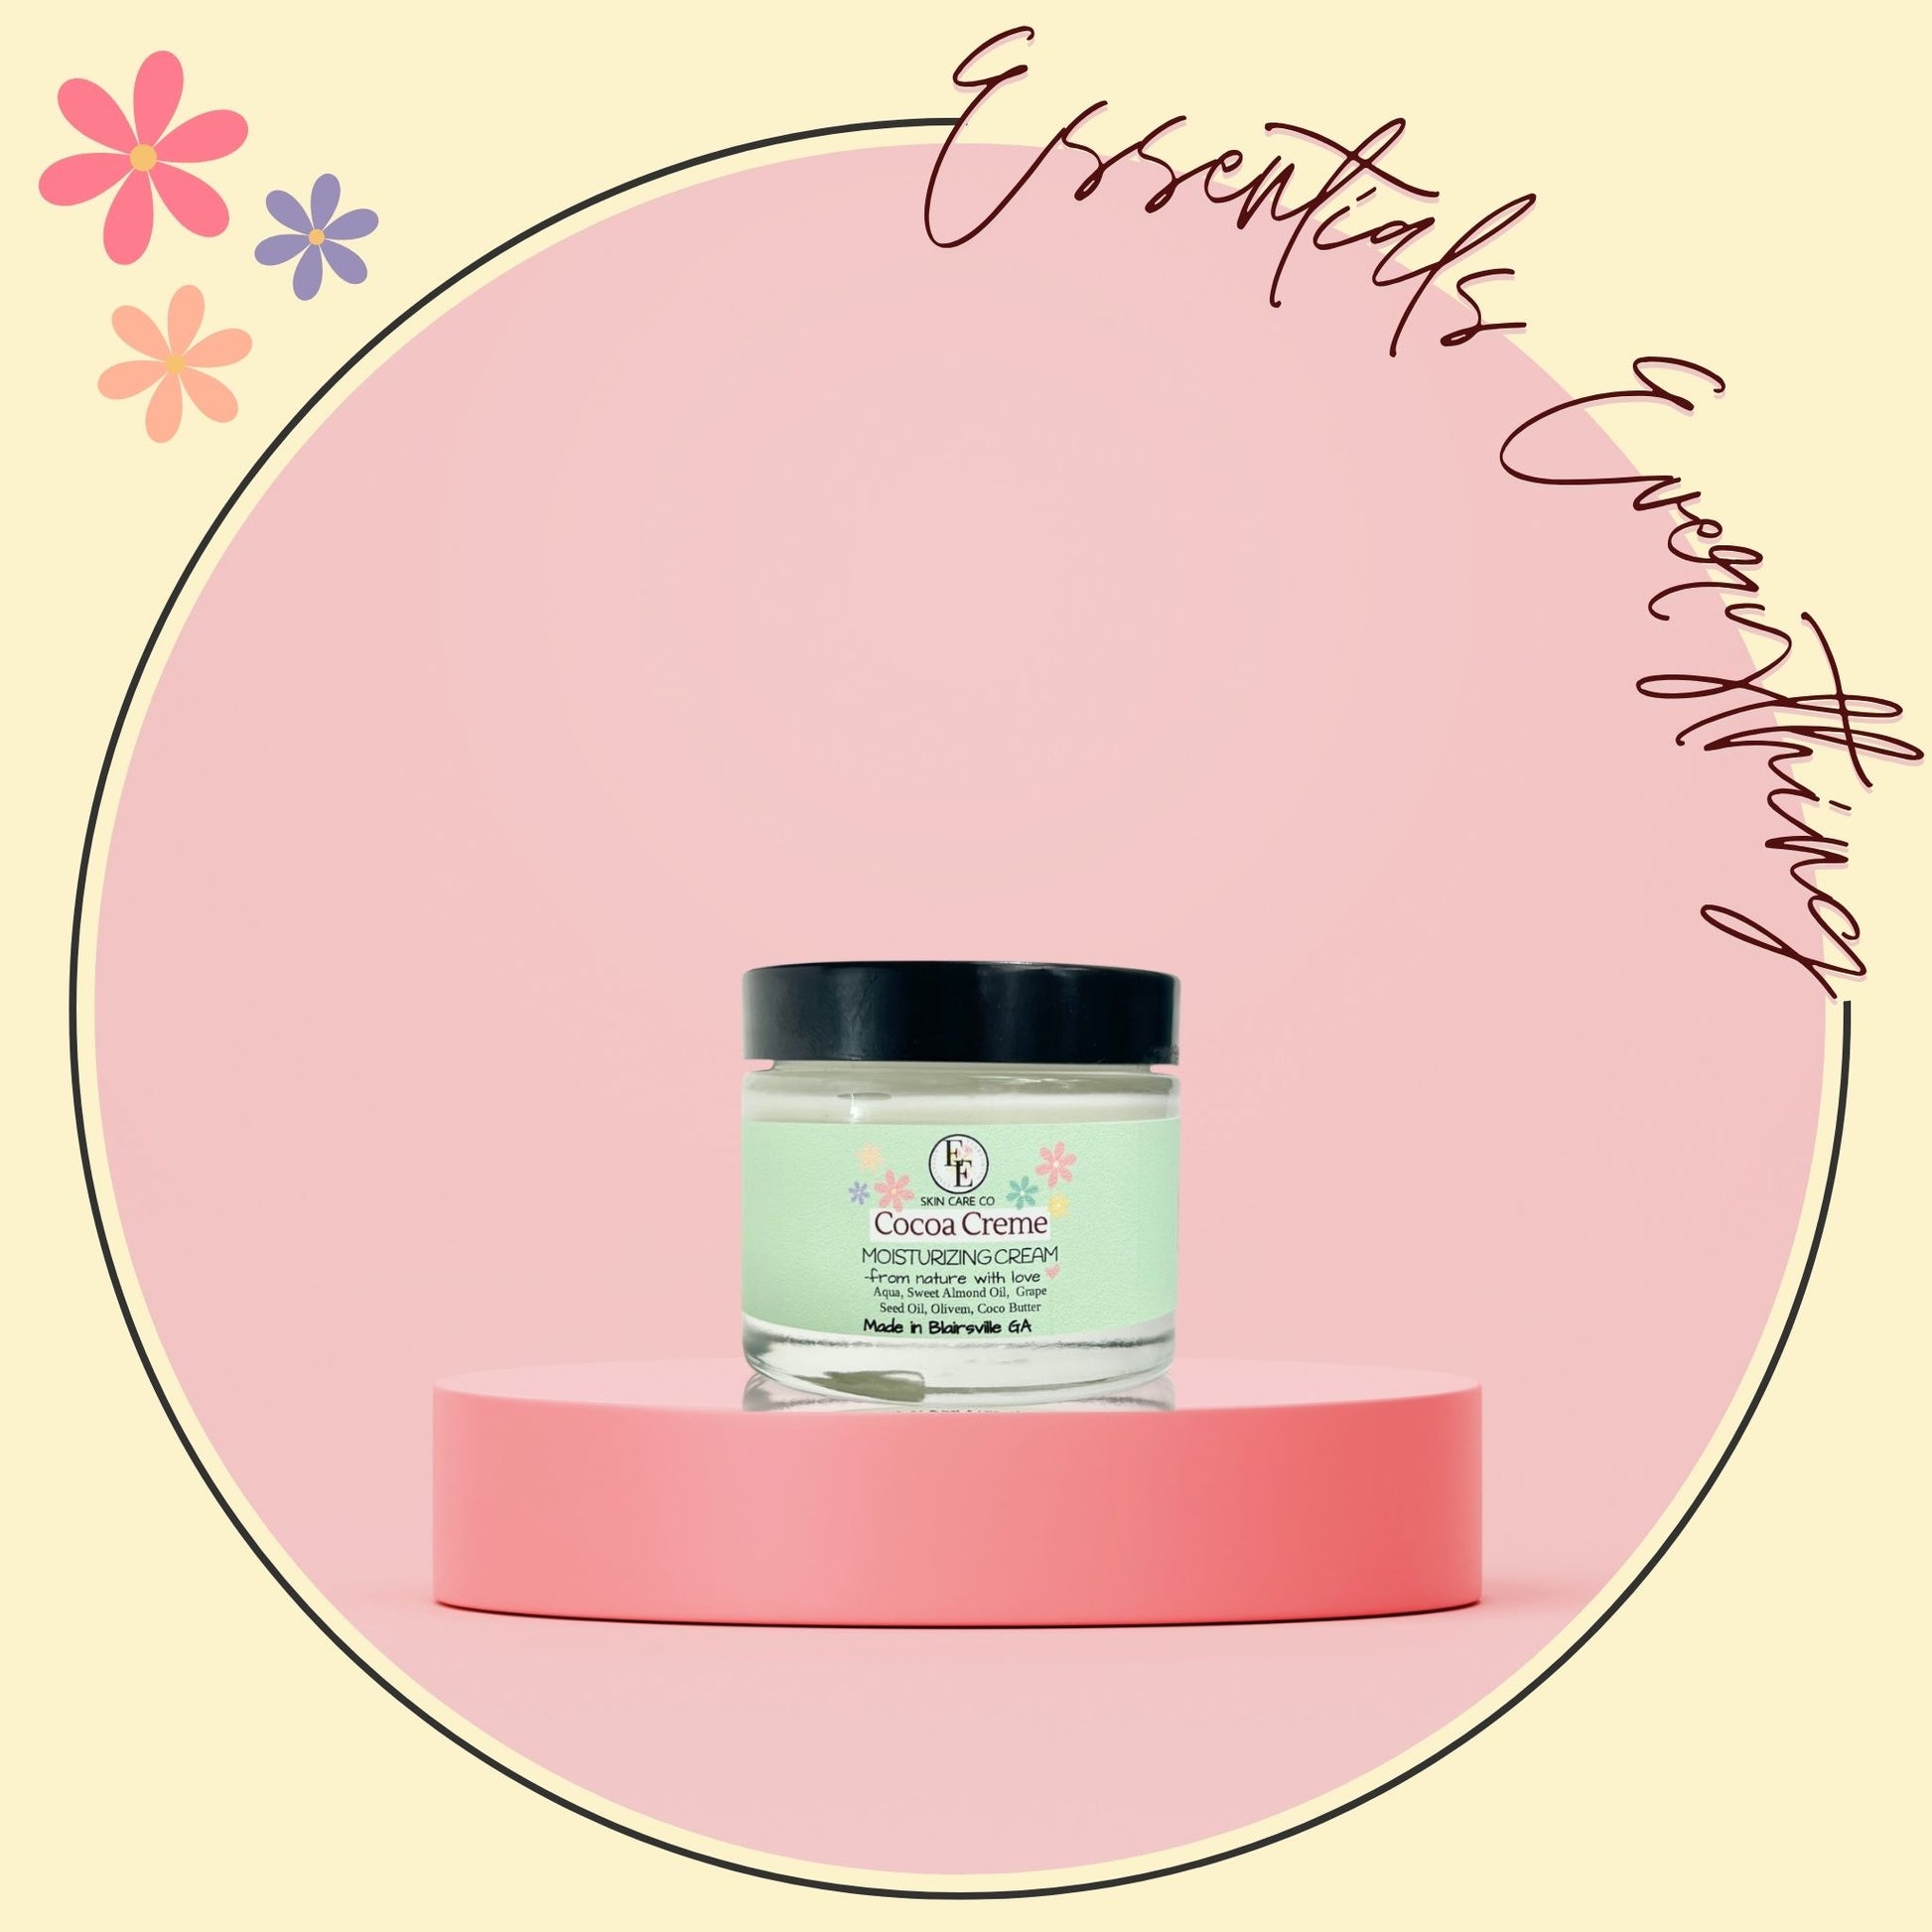 Cocoa Creme - All-Natural, Ultra-Nourishing Body Cream for All Skin Types from Essentials Everything Skin Care Co. 2.3oz.